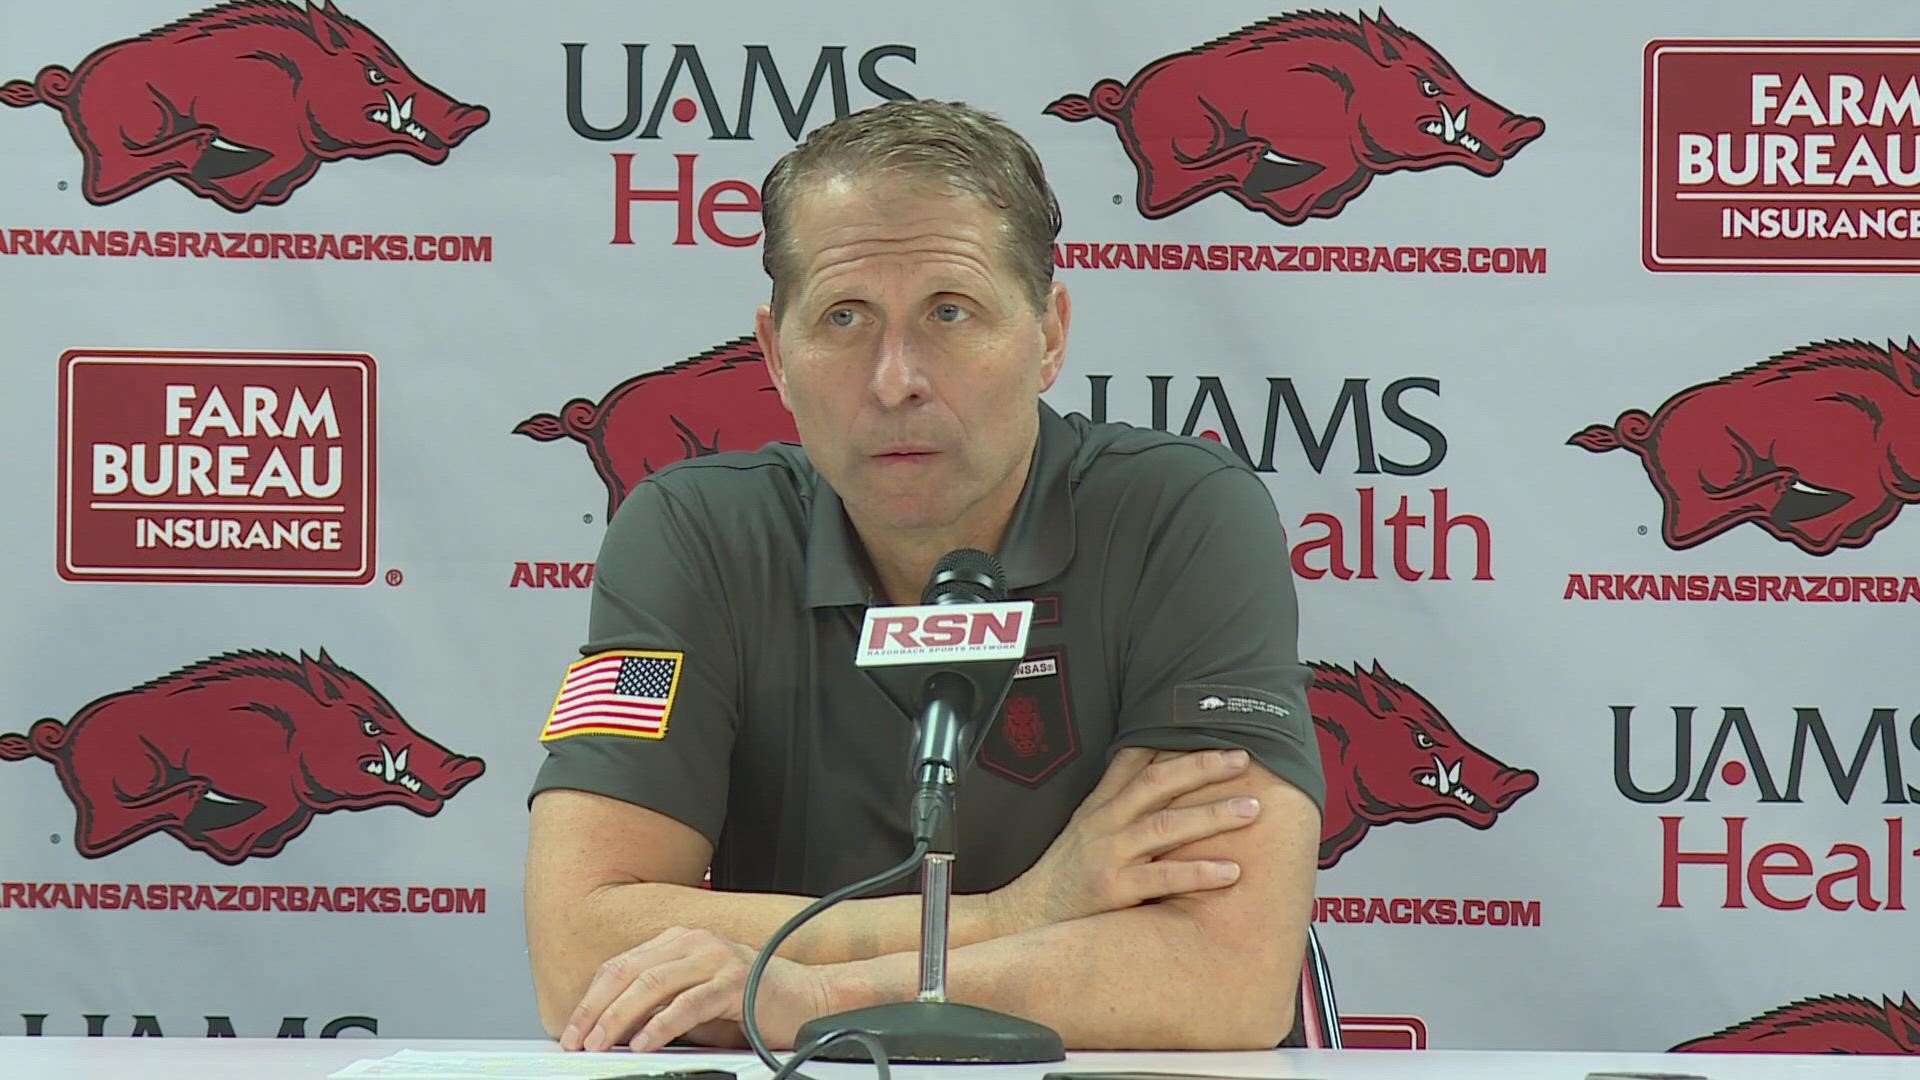 The Razorbacks' head coach speaks with the media after the team's 69-57 victory over Ole Miss at Bud Walton Arena.